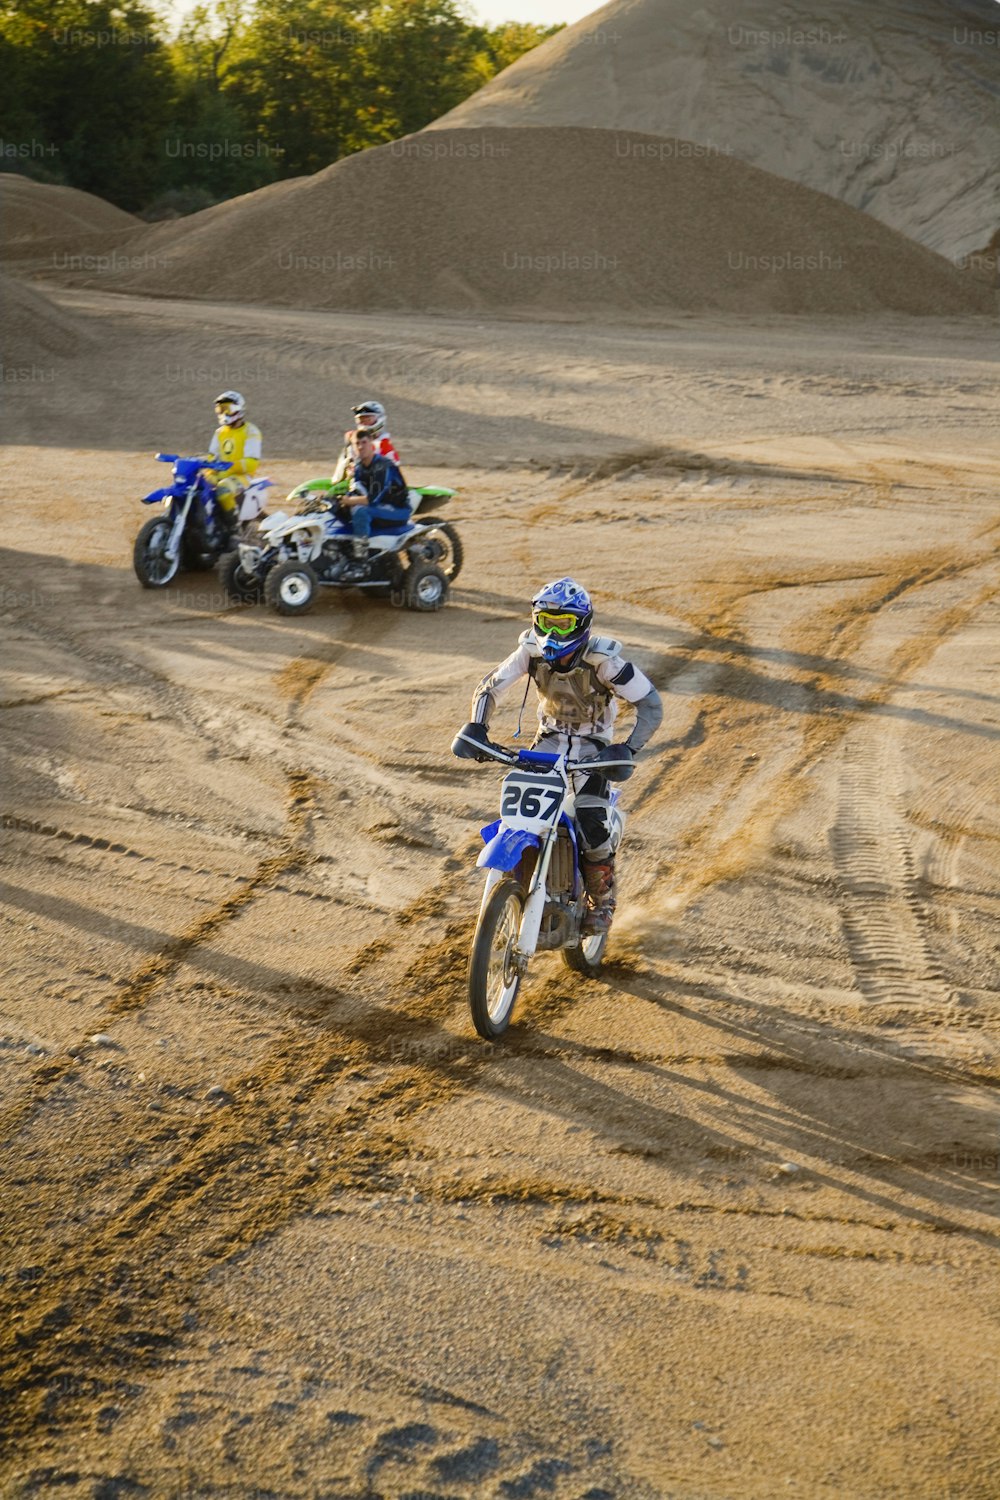 a group of people riding dirt bikes on a dirt road